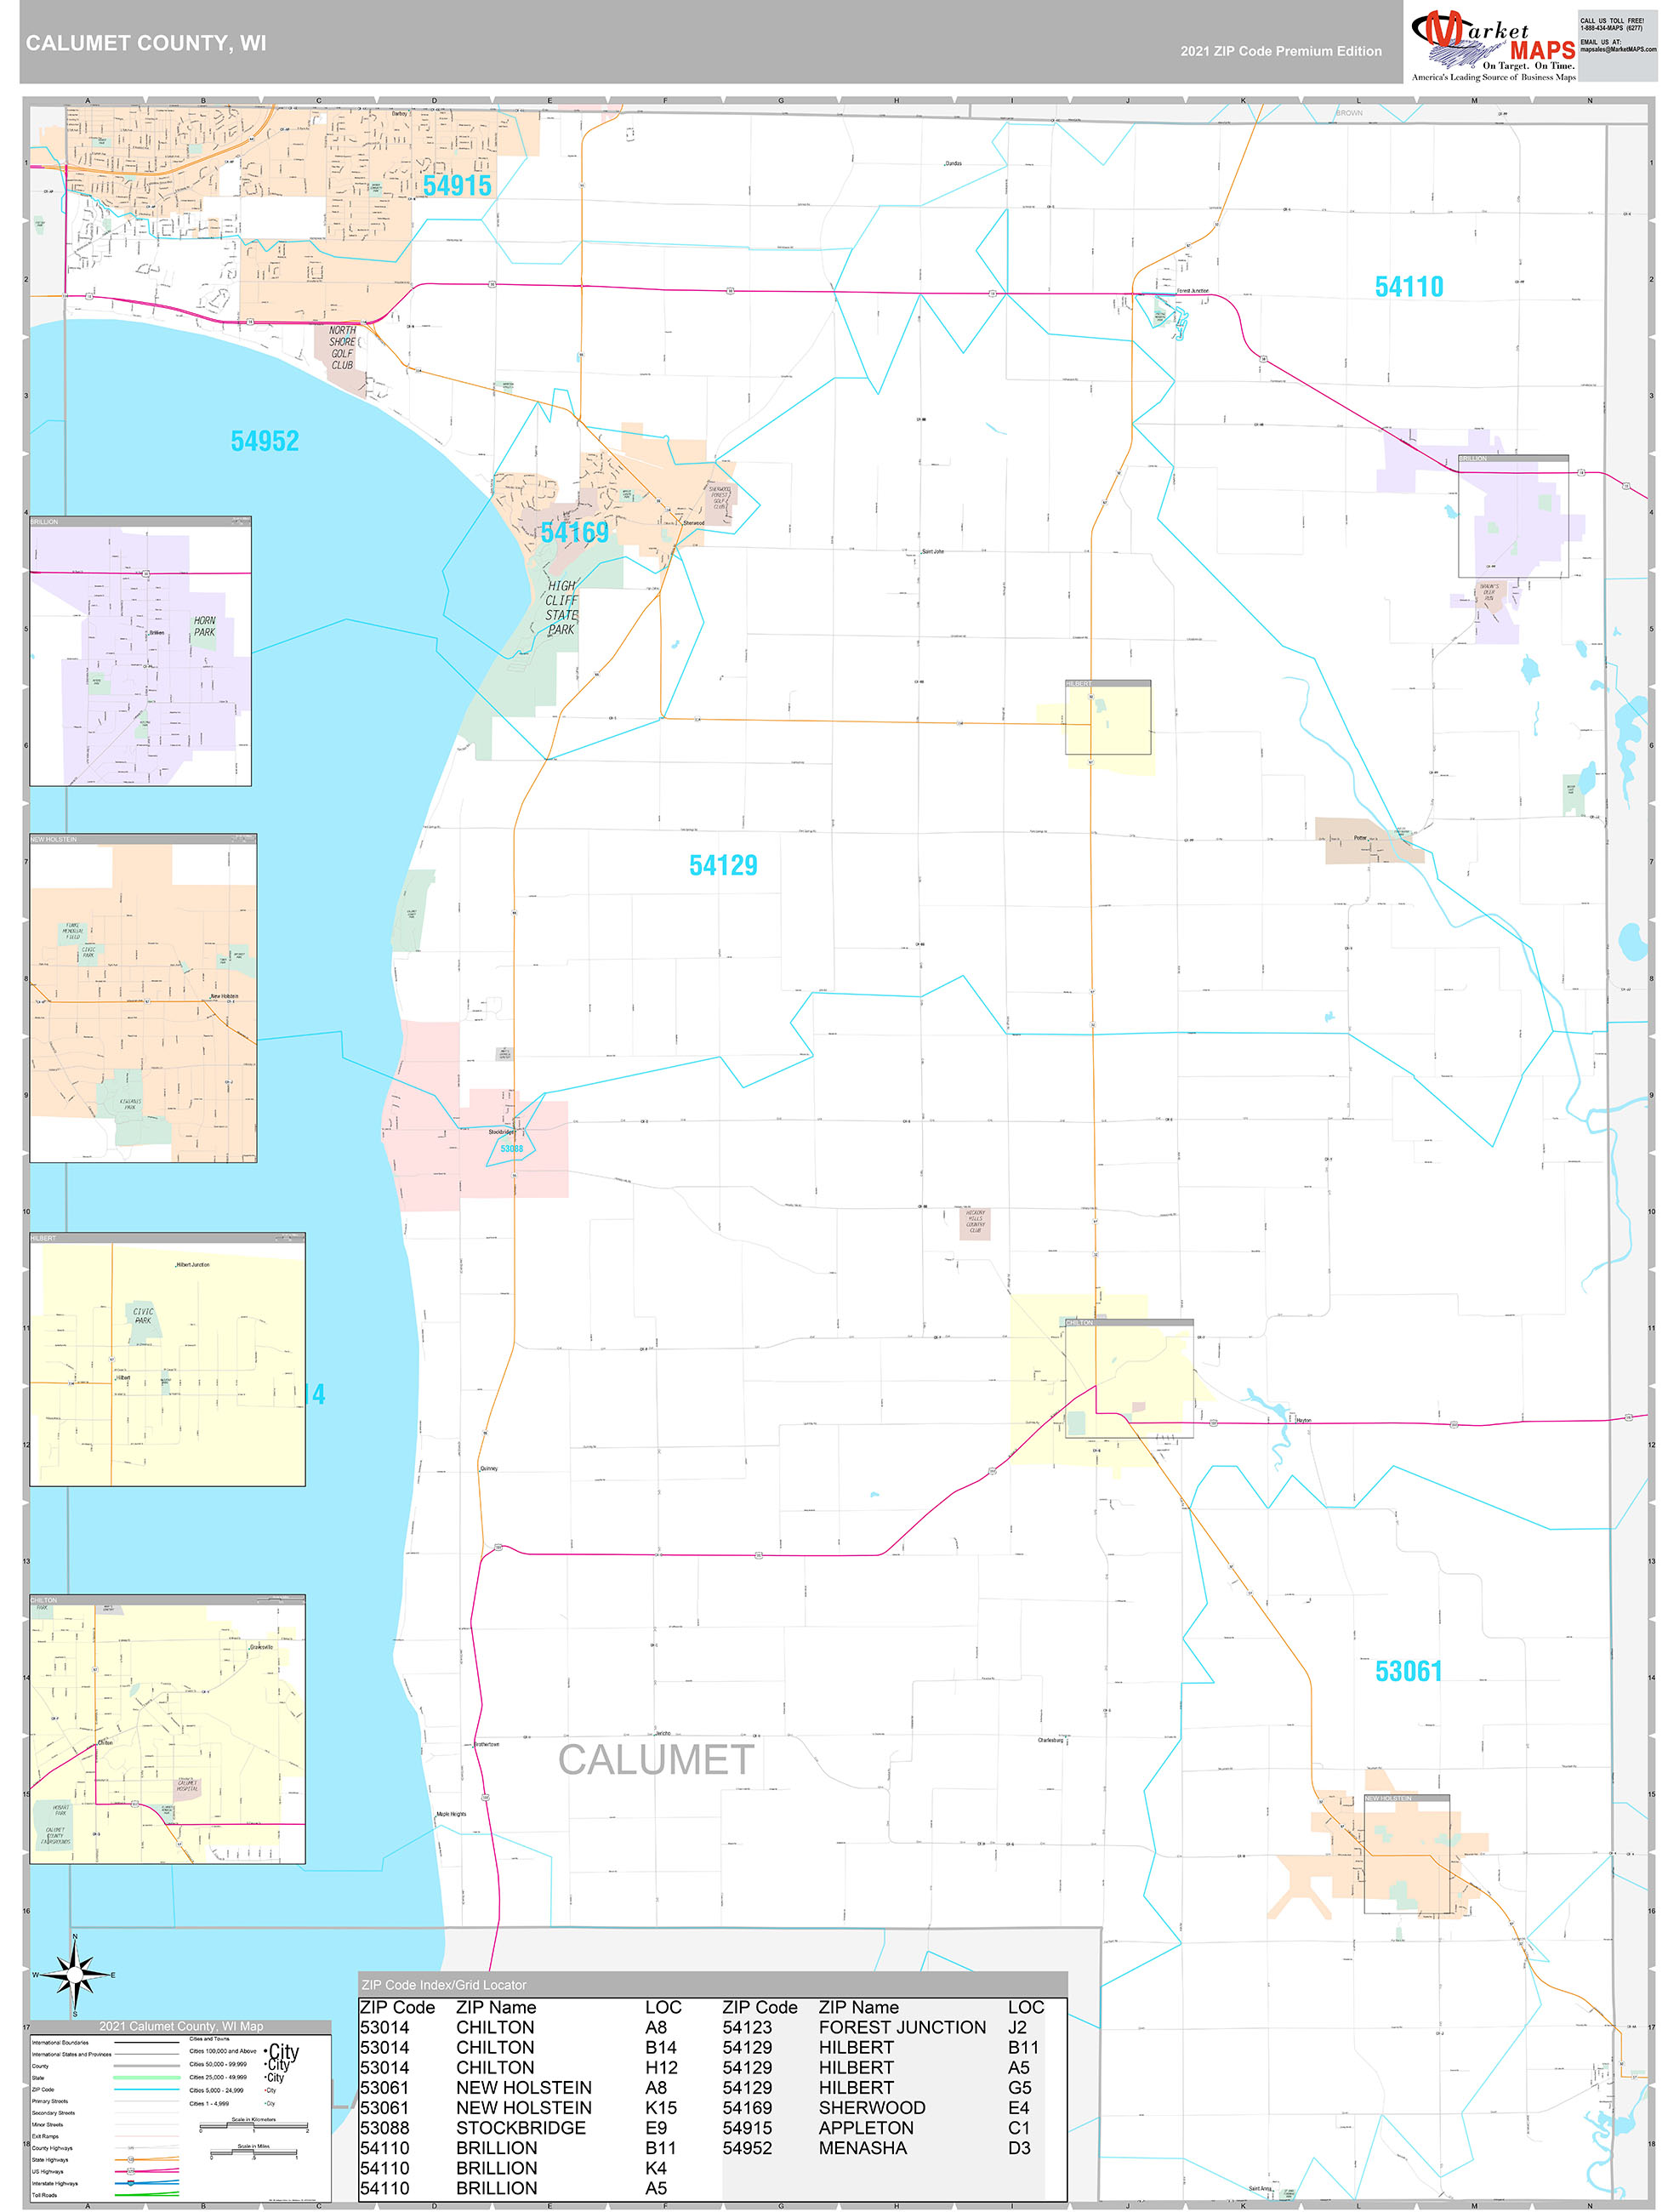 Calumet County, WI Wall Map Premium Style by MarketMAPS